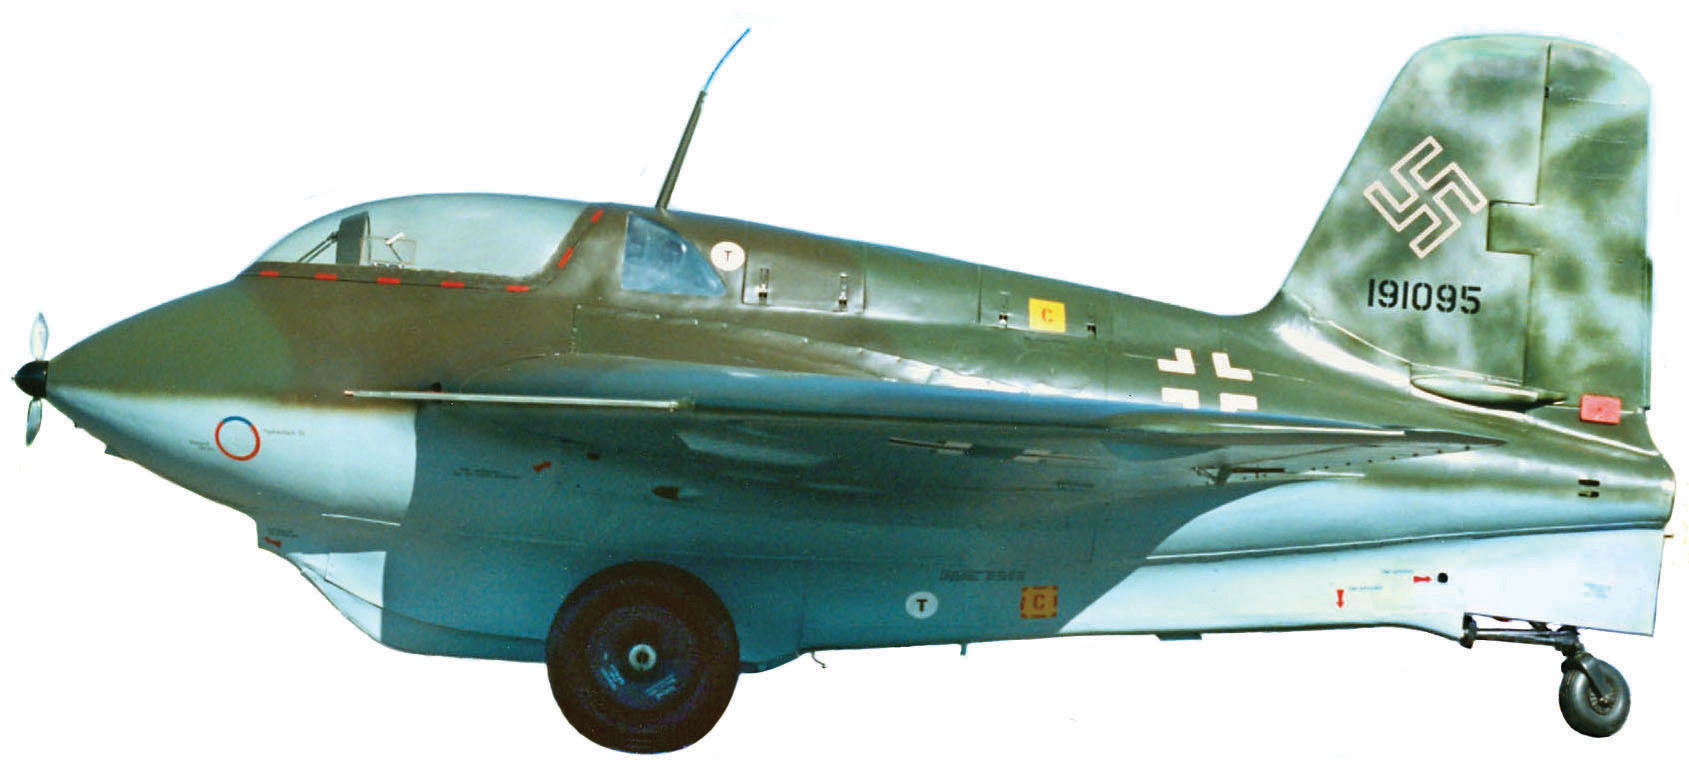 This side view of the Me-163B in the Air Force collection gives some perspective on the diminutive size of the aircraft.  